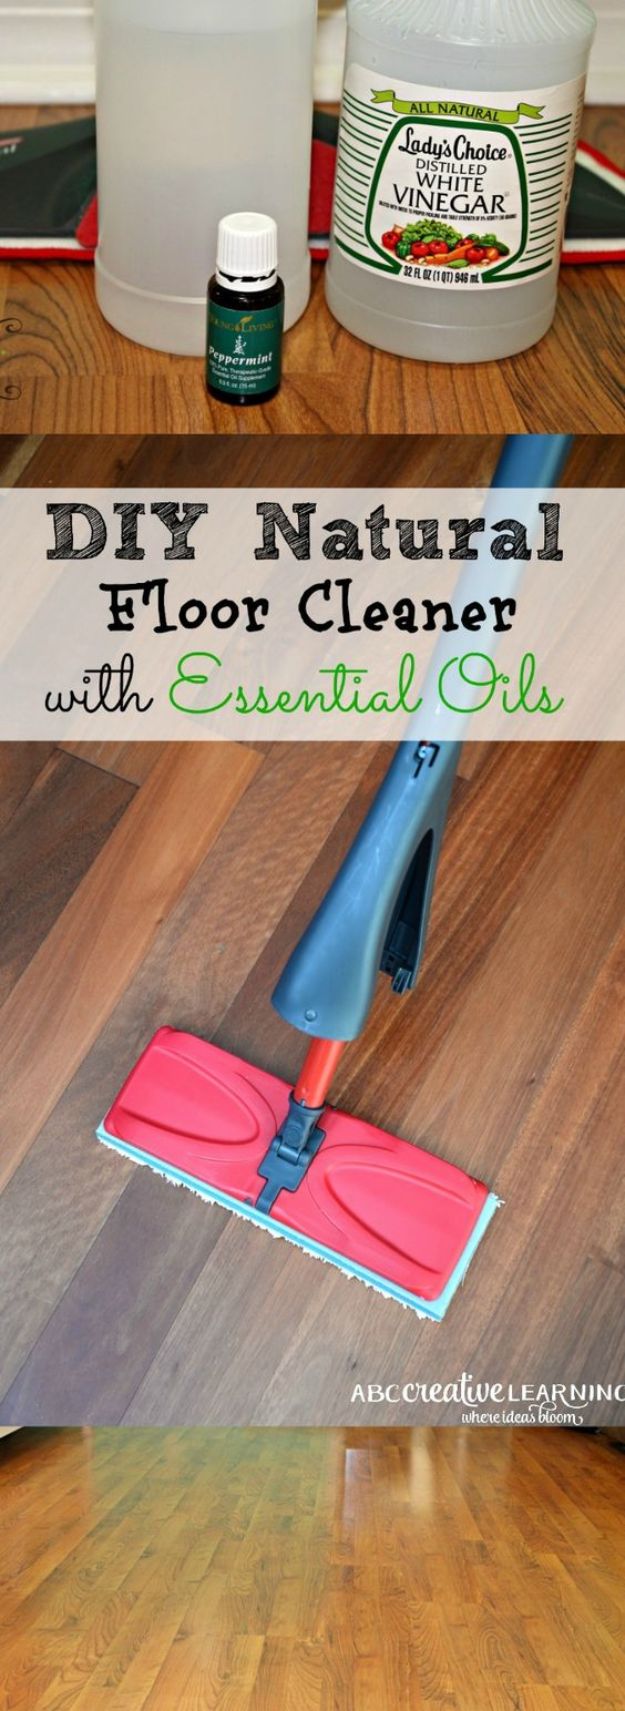 DIY Natural Floor Cleaner With Essential Oils